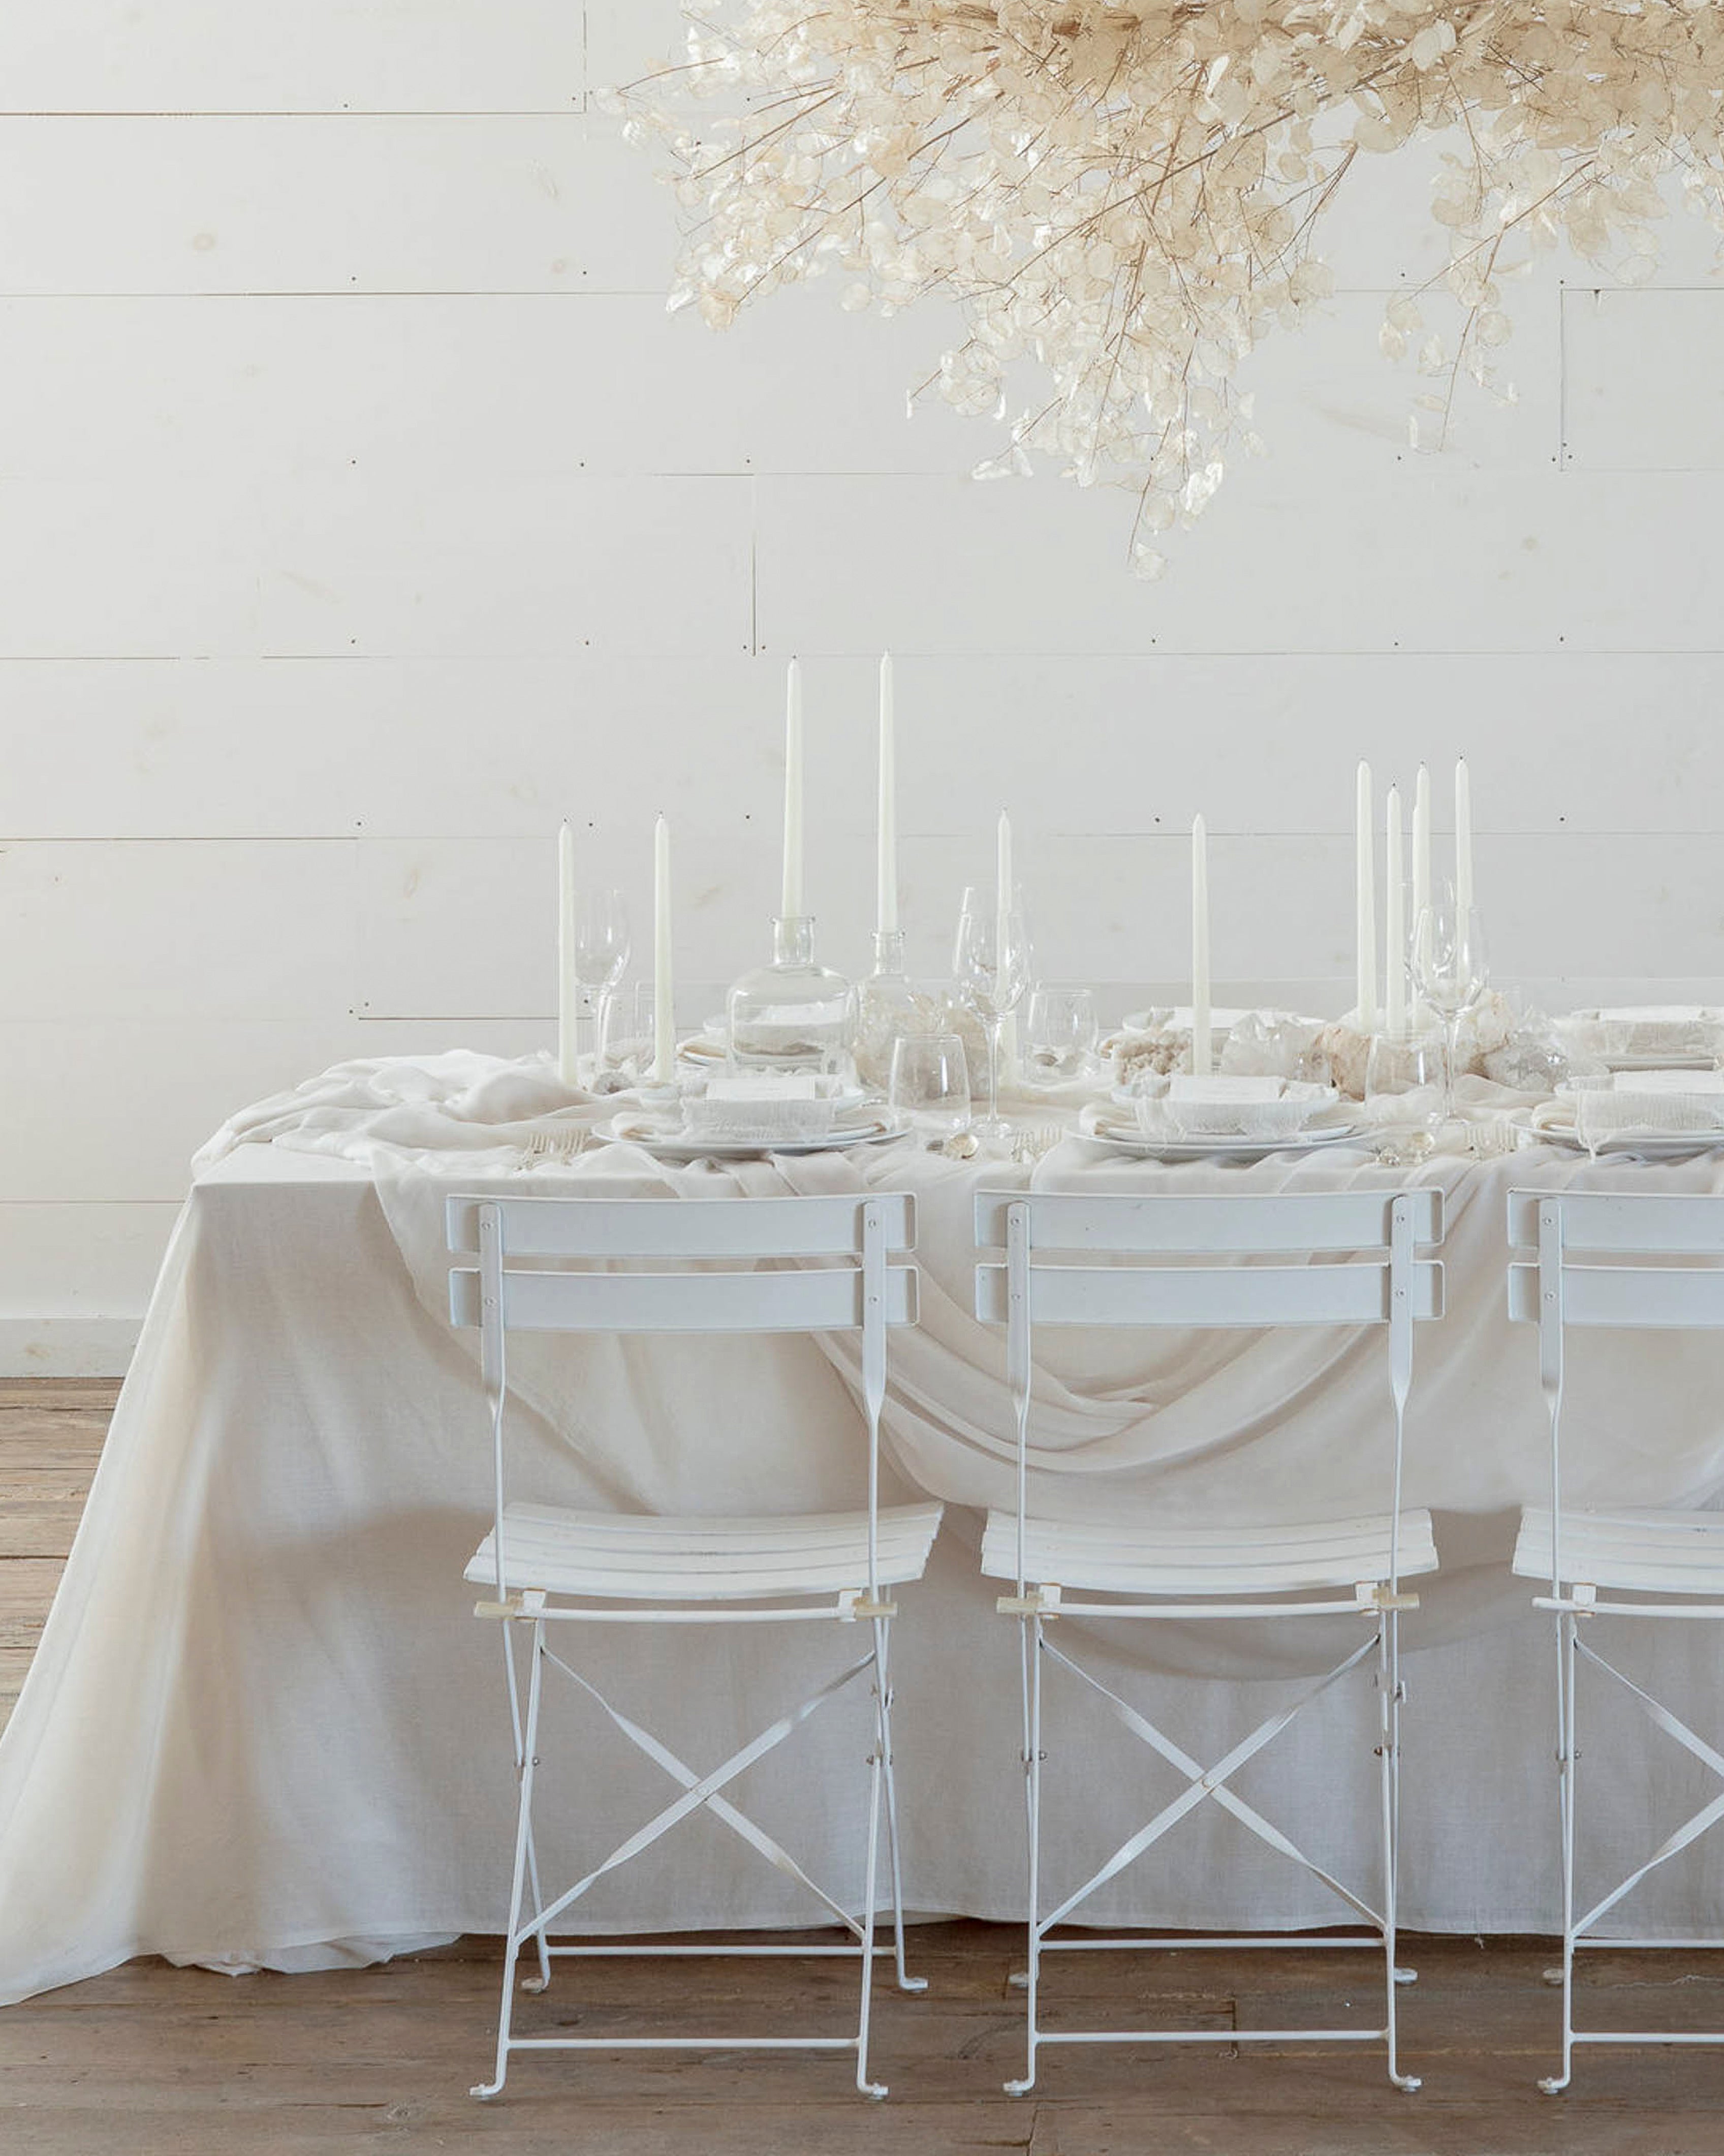 wedding table setting with monochromatic white table decor